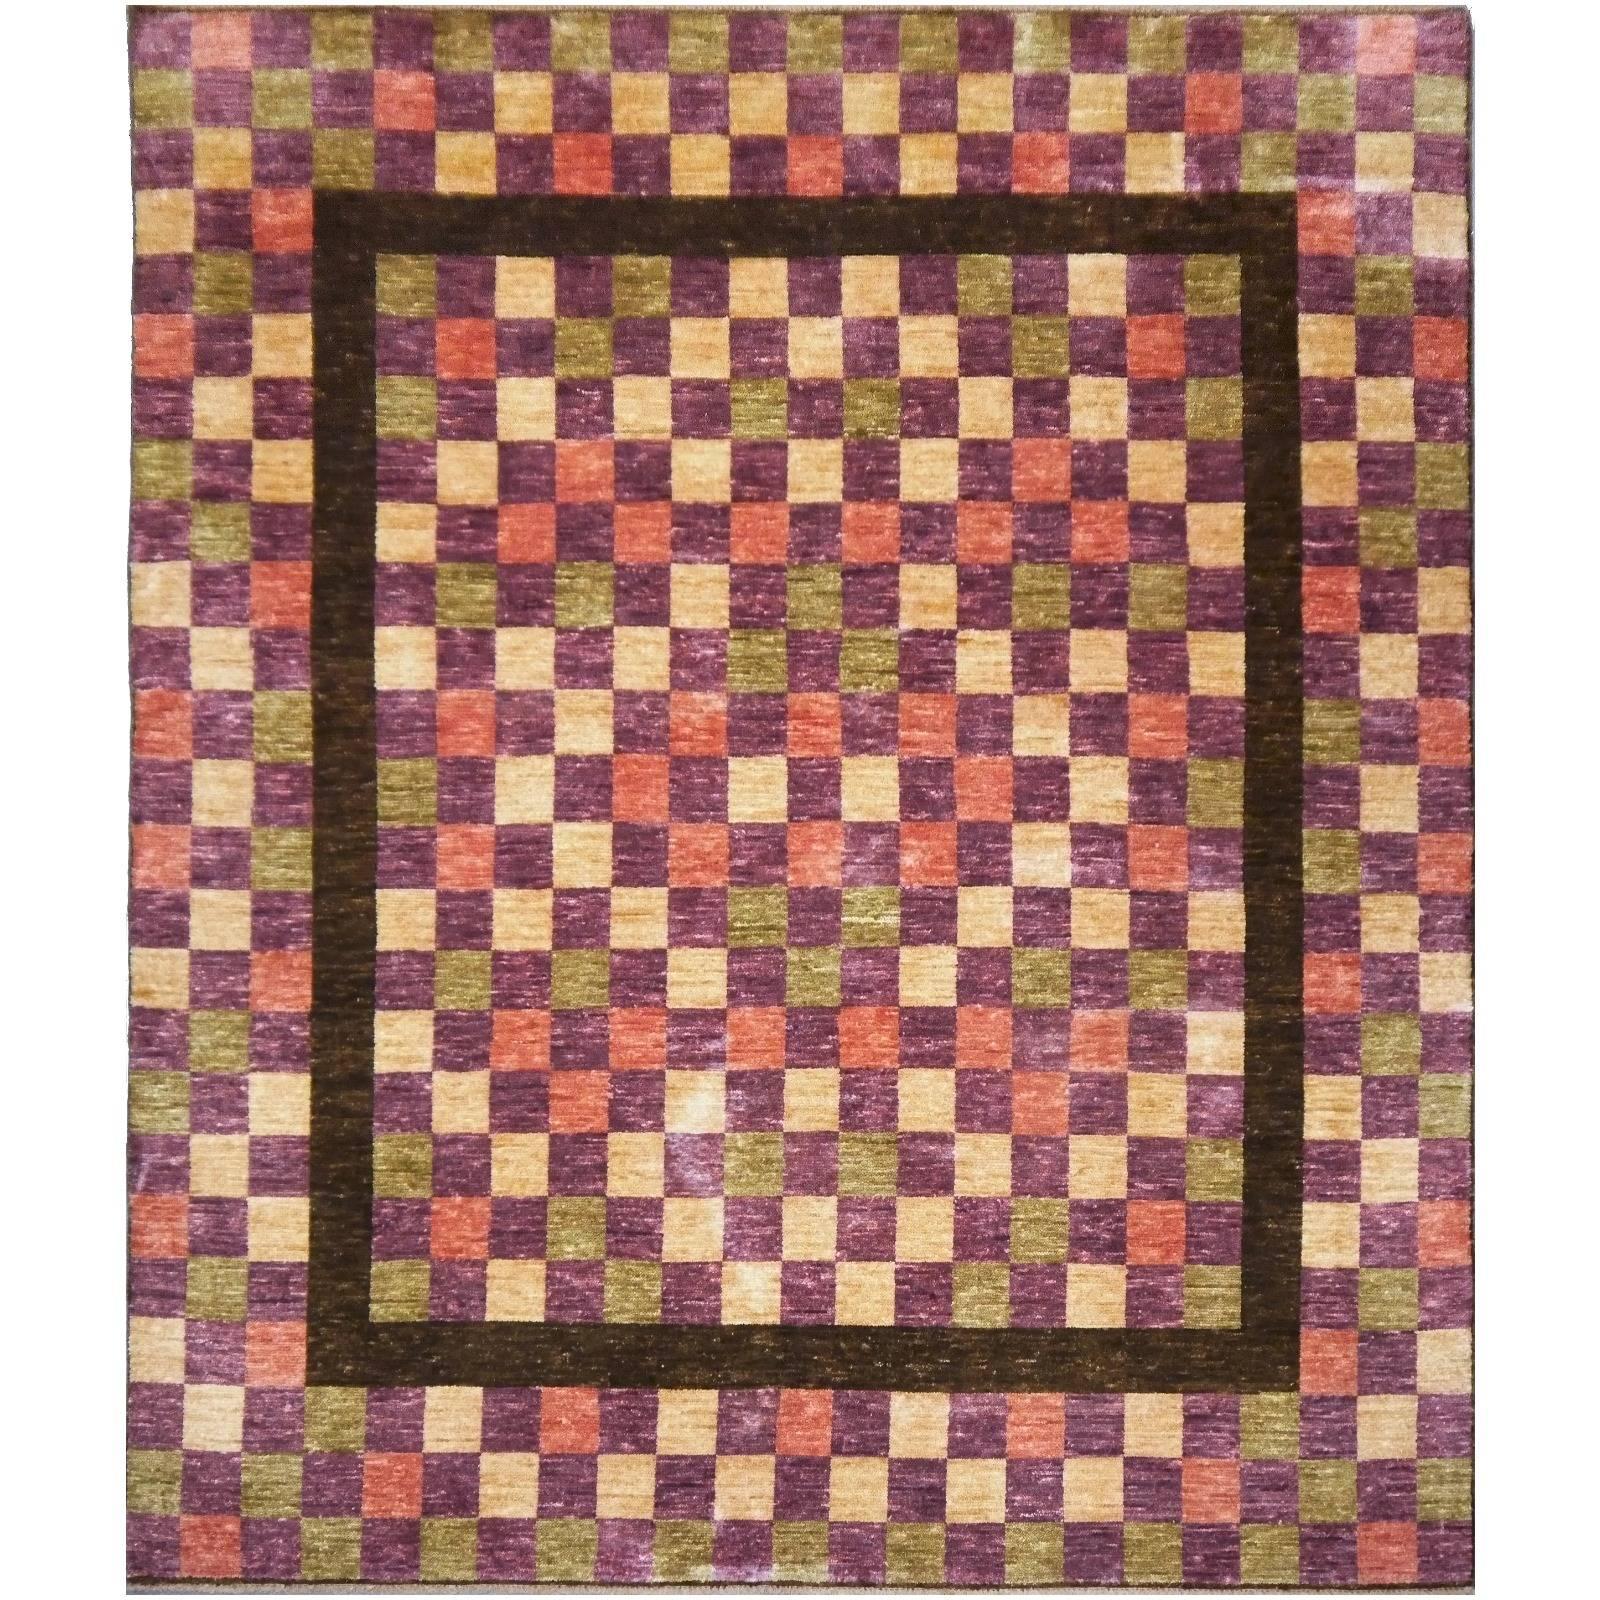 Modern Cubist Style Rug hand knotted wool carpet cirva 9 x 9 ft Coral Lilac 